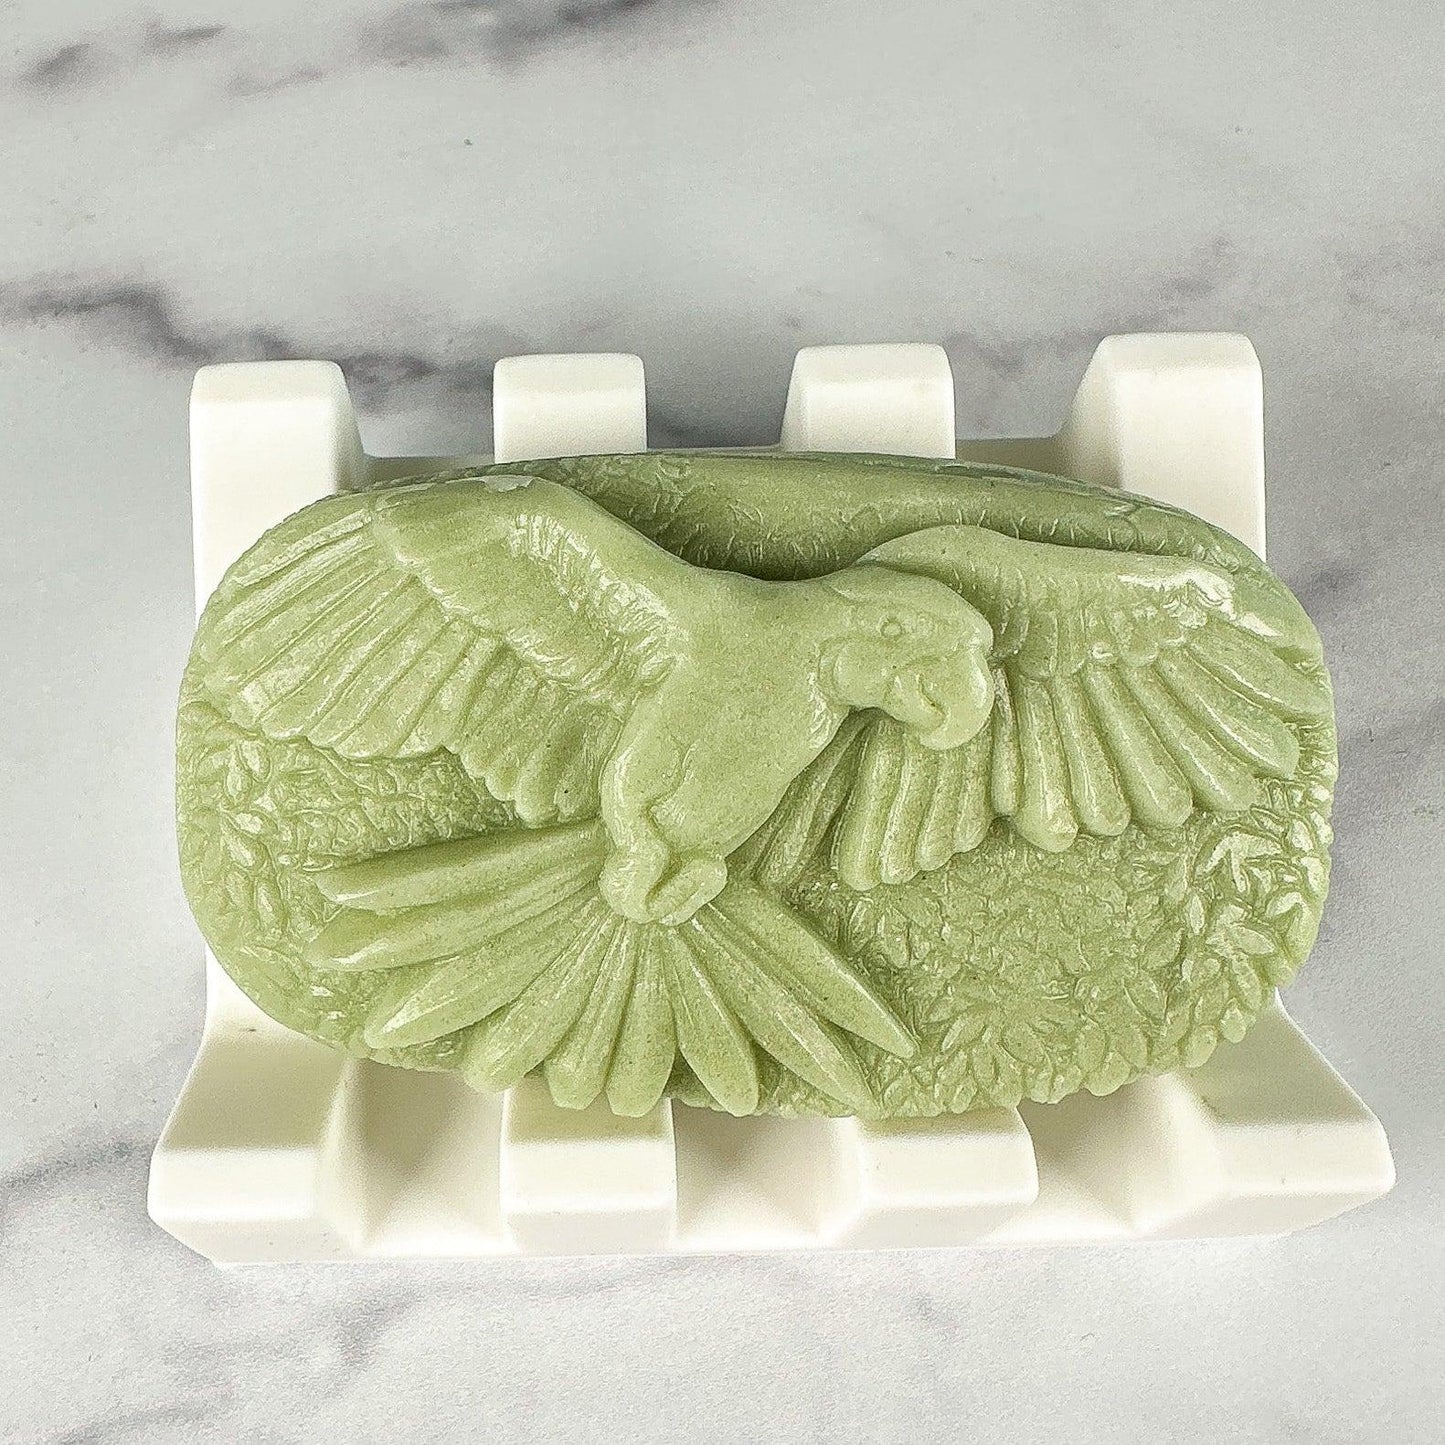 Macaw Soap Bar - The Serpentry